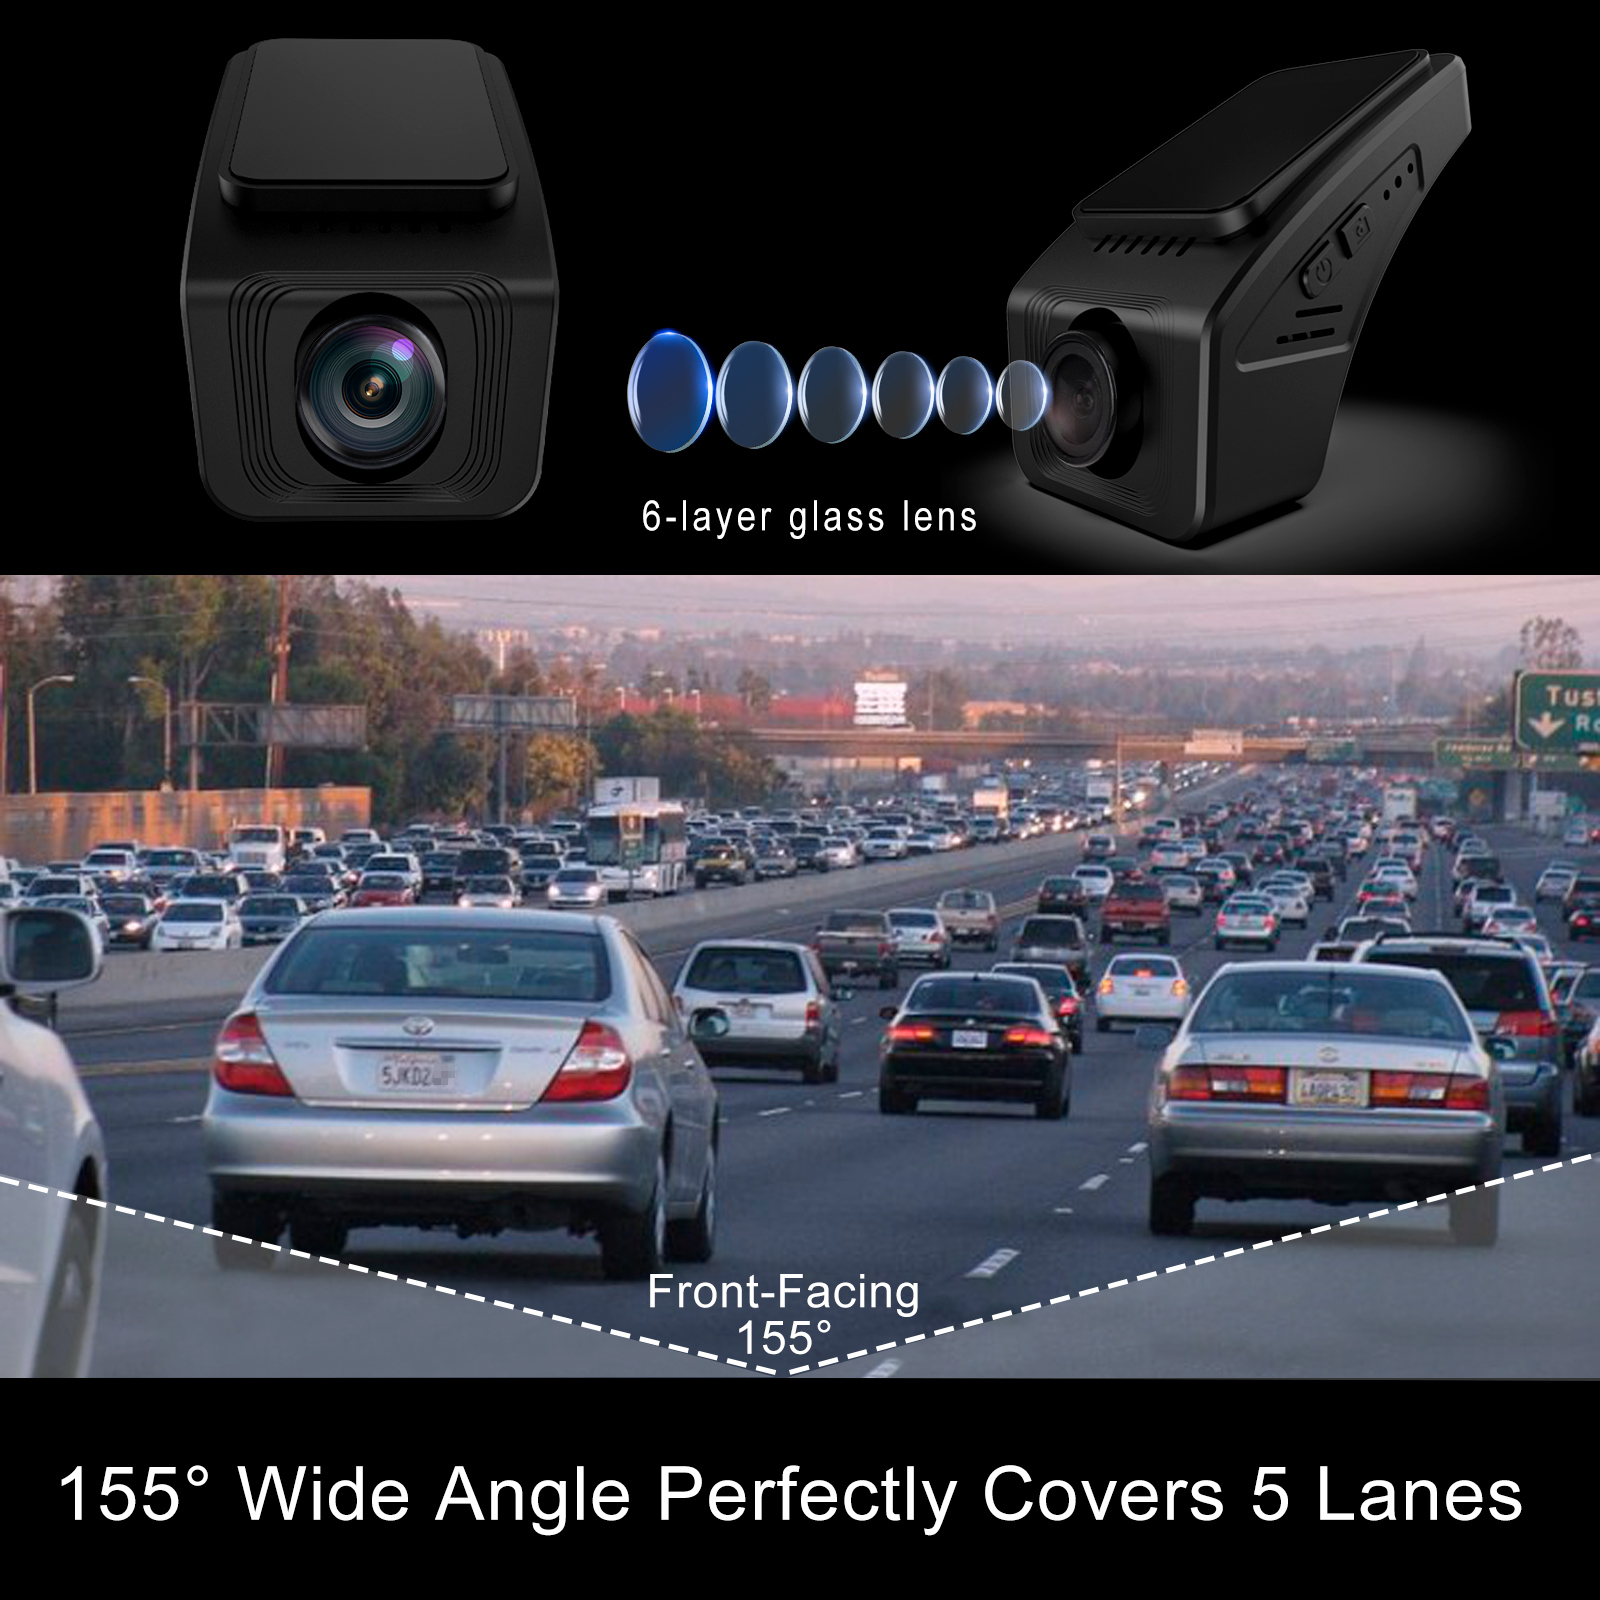 AX2V Car Dash Cam Front 1080P FHD WiFi Dash Camera for Cars,Screenless Dashboard  Camera Recorder with Super Night Vision, 155° Wide Angle, HDR, Loop  Recording, G-Sensor, Time-Lapse, Parking Mode –